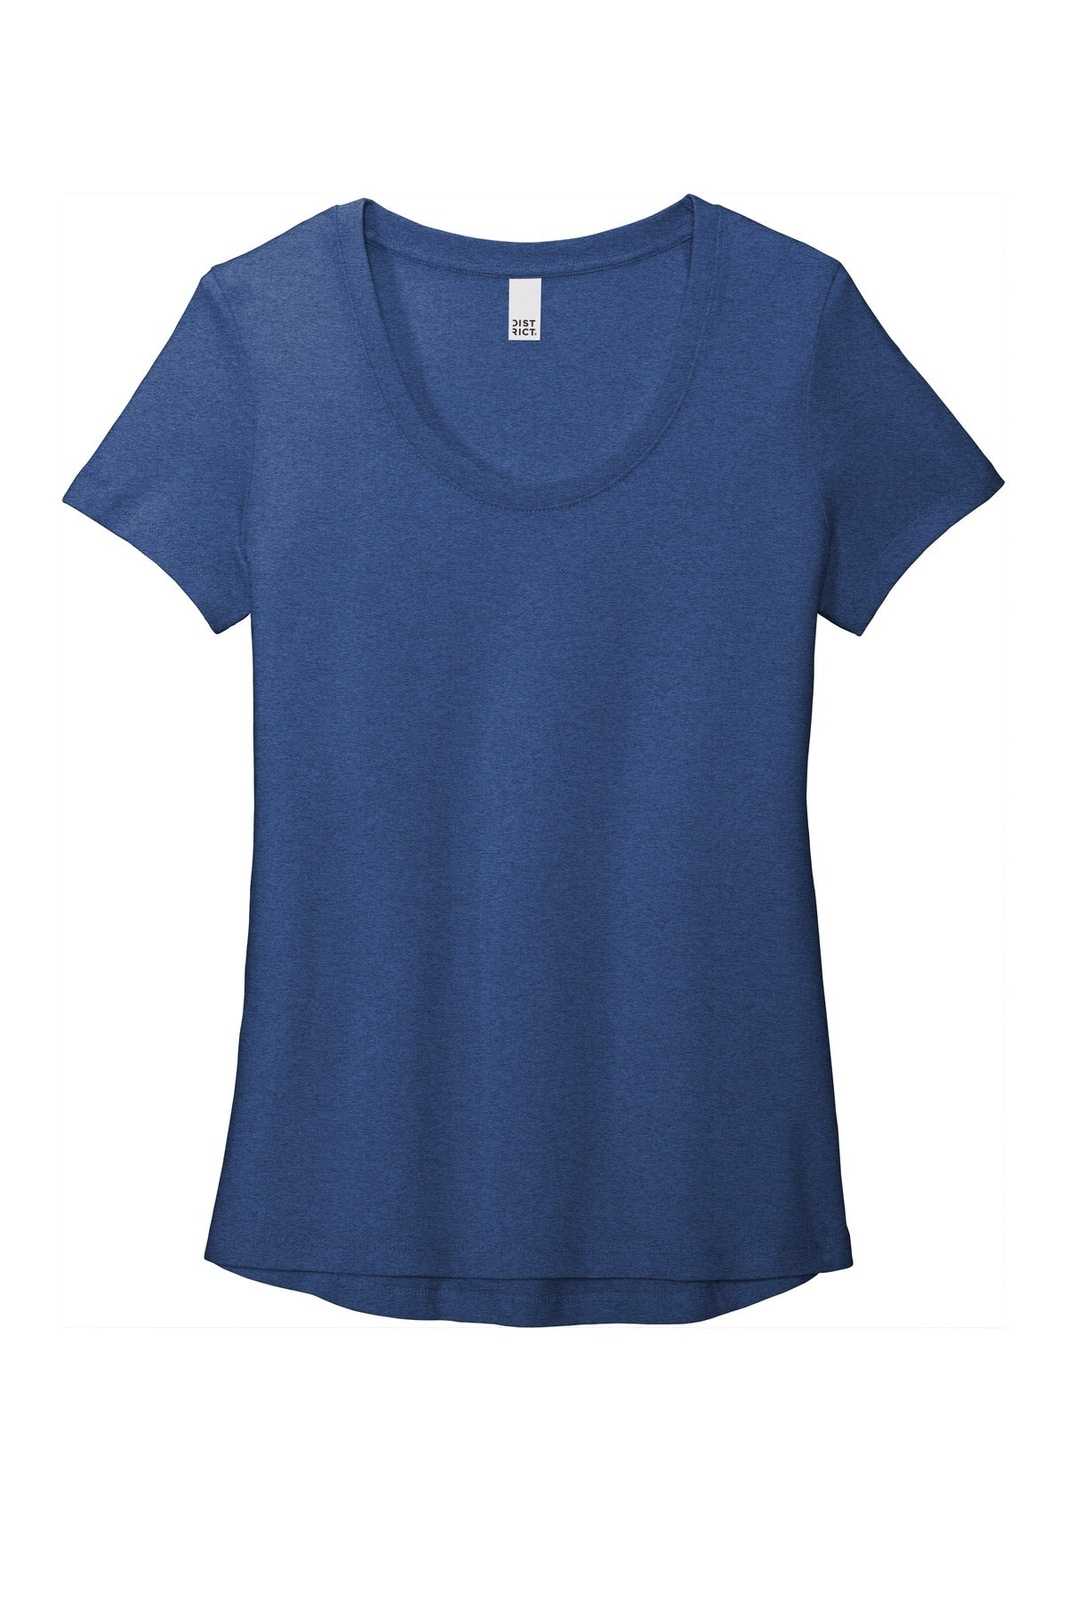 District DT7501 Womens Flex Scoop Neck Tee - Heathered Deep Royal - HIT a Double - 5